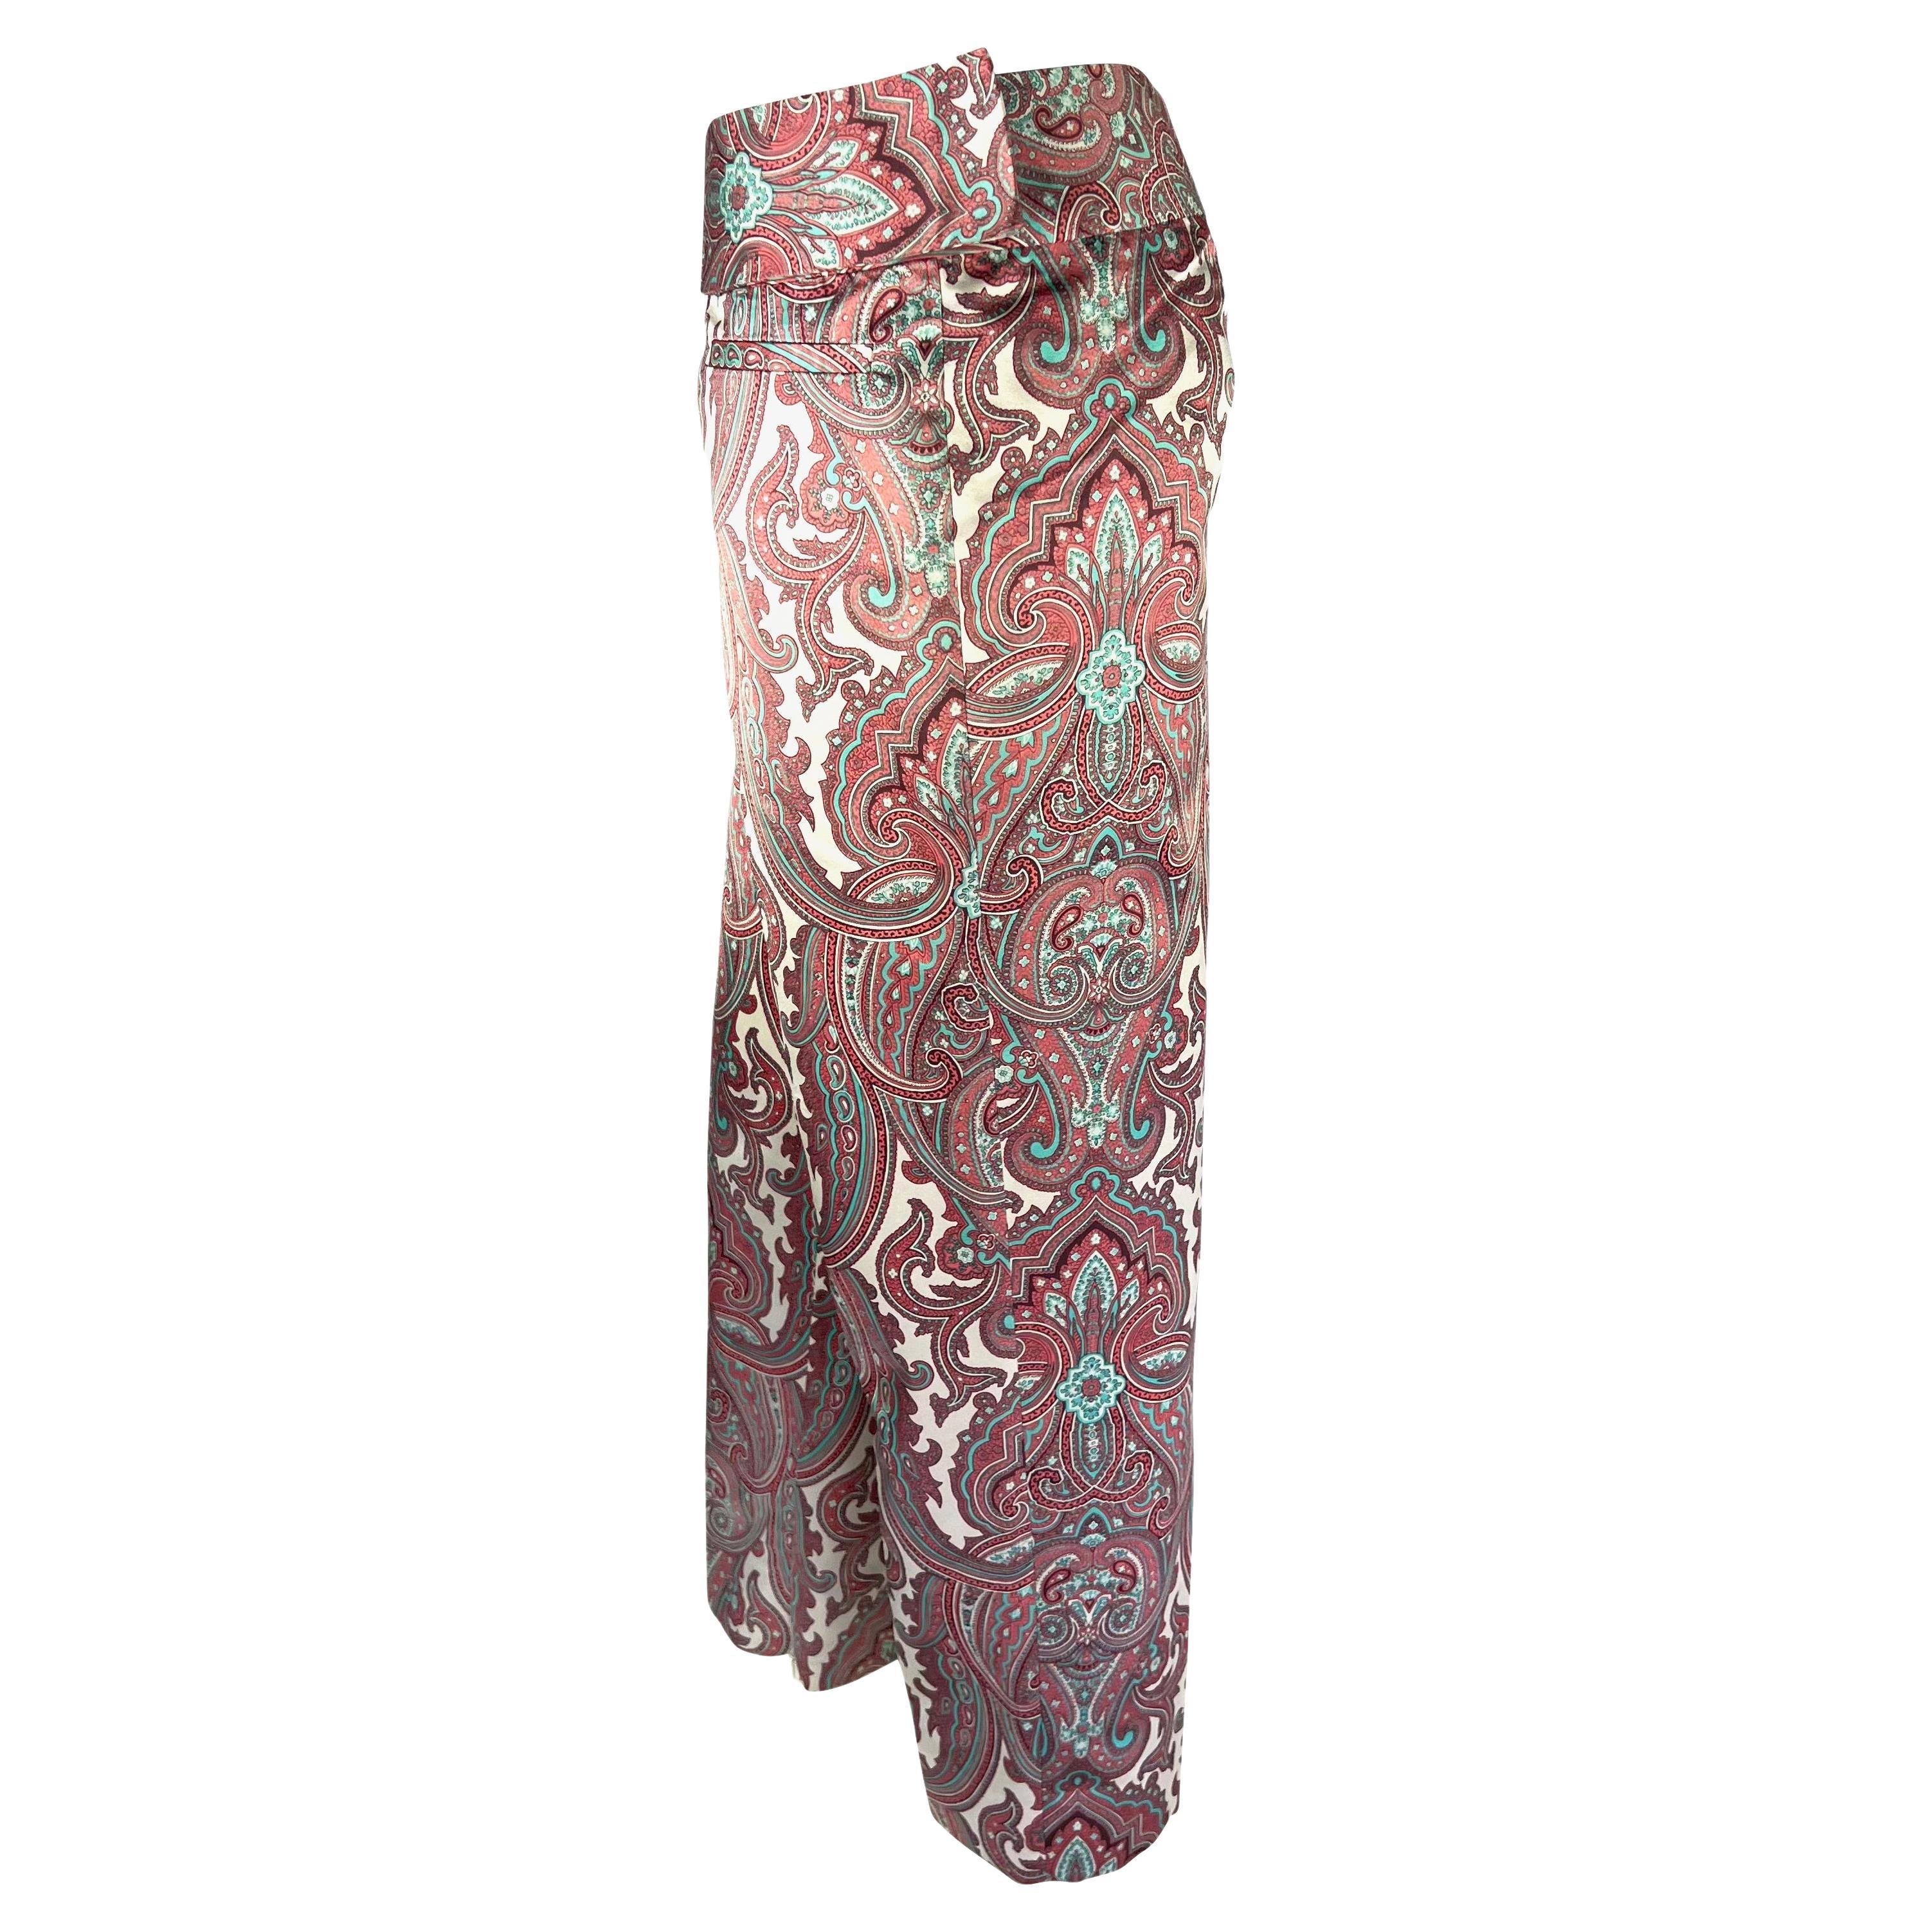 S/S 2000 Dolce & Gabbana White Pink Satin Paisley Print Tapered Cropped Pants In Excellent Condition For Sale In West Hollywood, CA